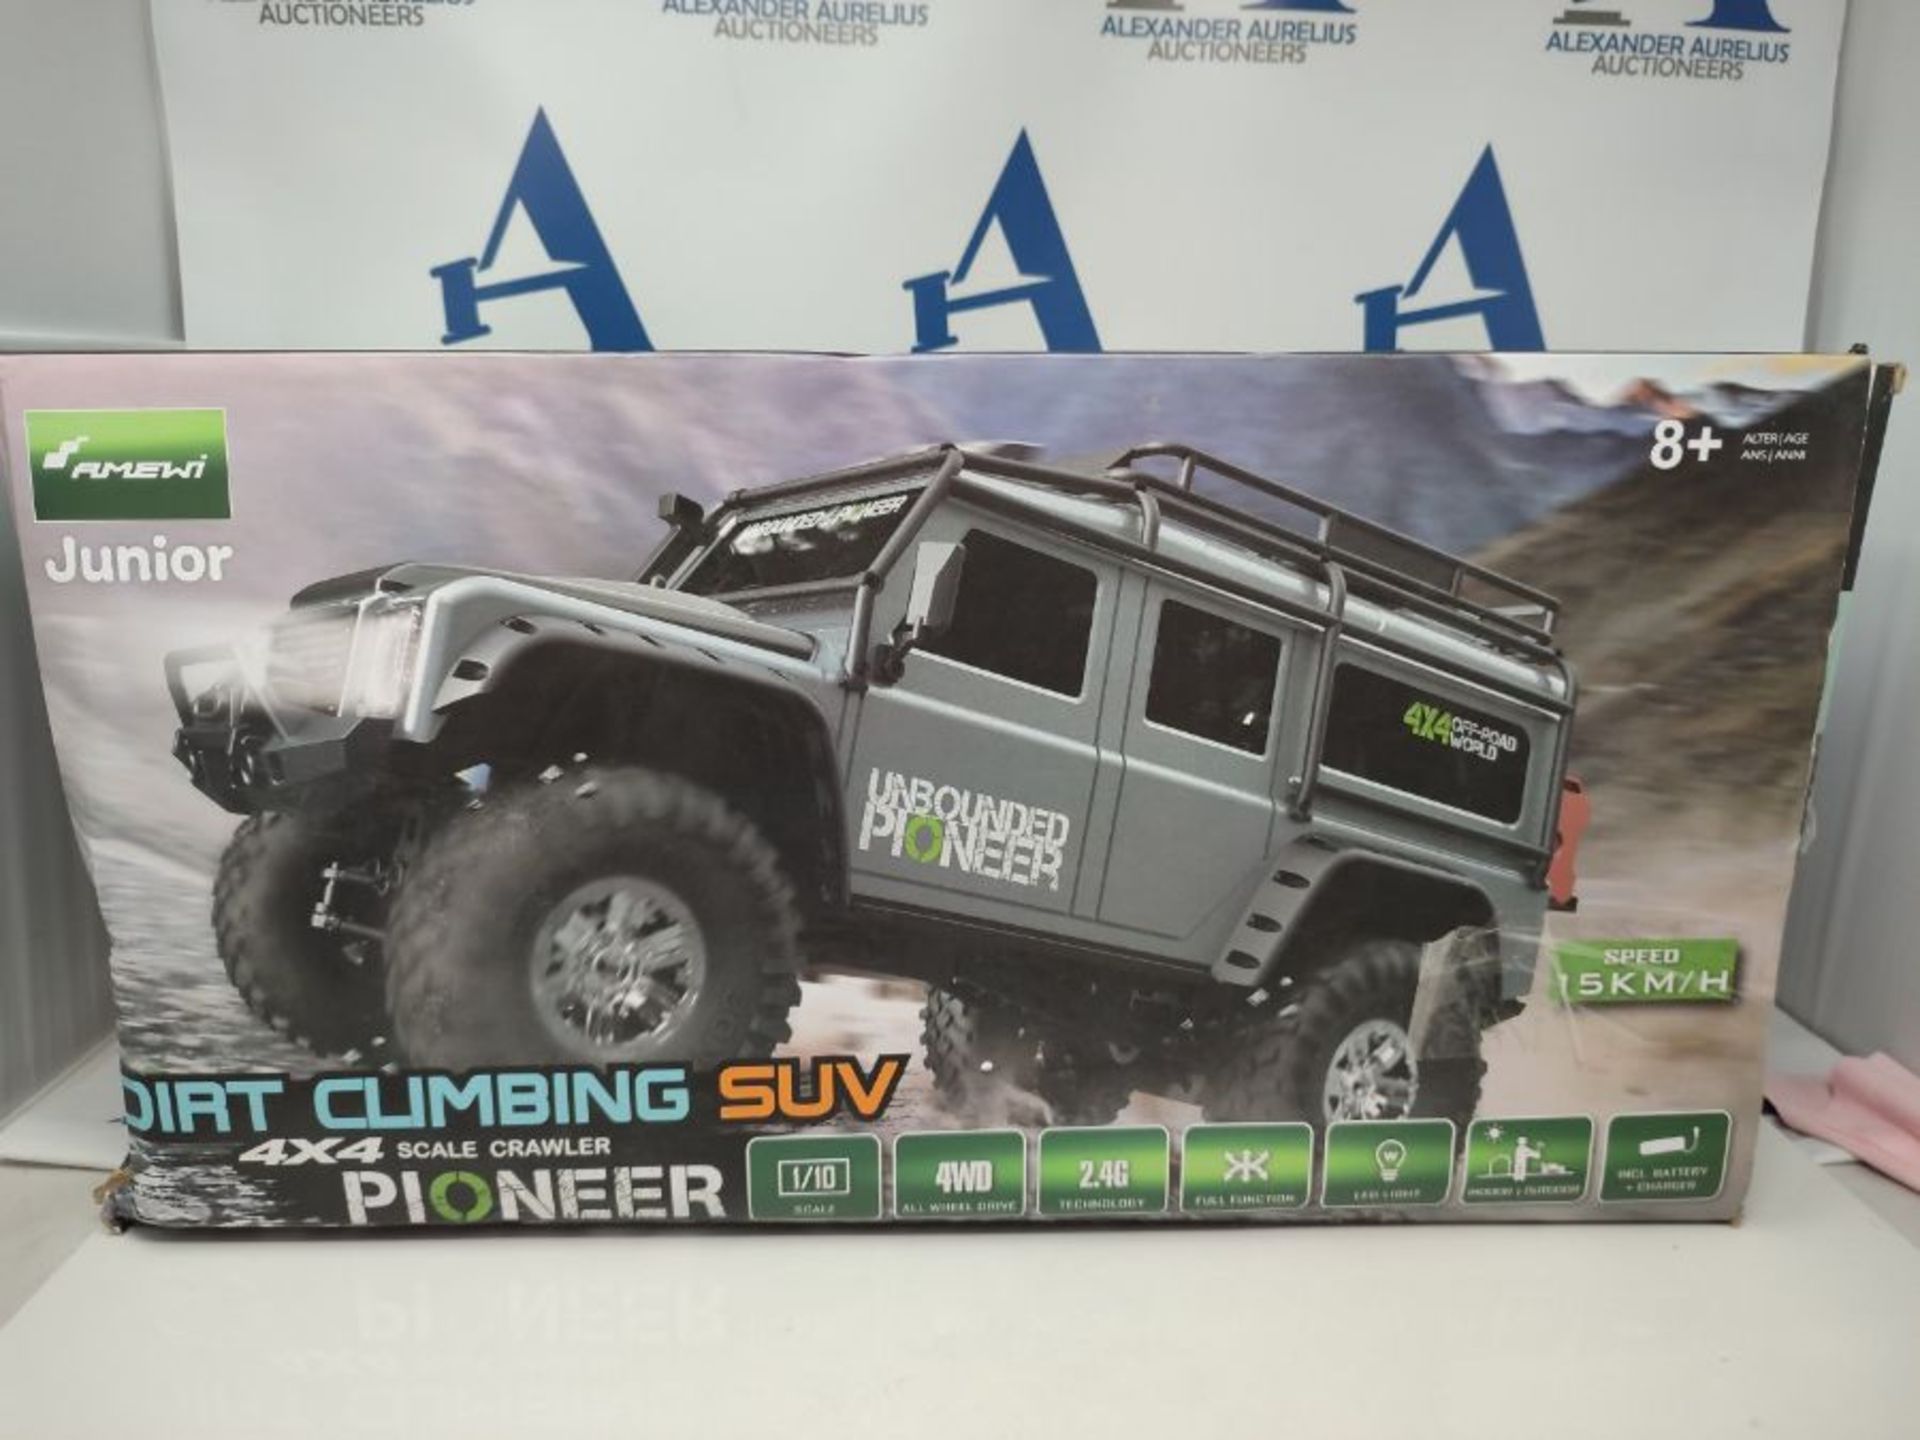 RRP £113.00 Amewi 22528 RC Dirt Climbing Pioneer SUV Crawler 4WD 1:10 RTR with Remote Control, Bat - Image 2 of 3